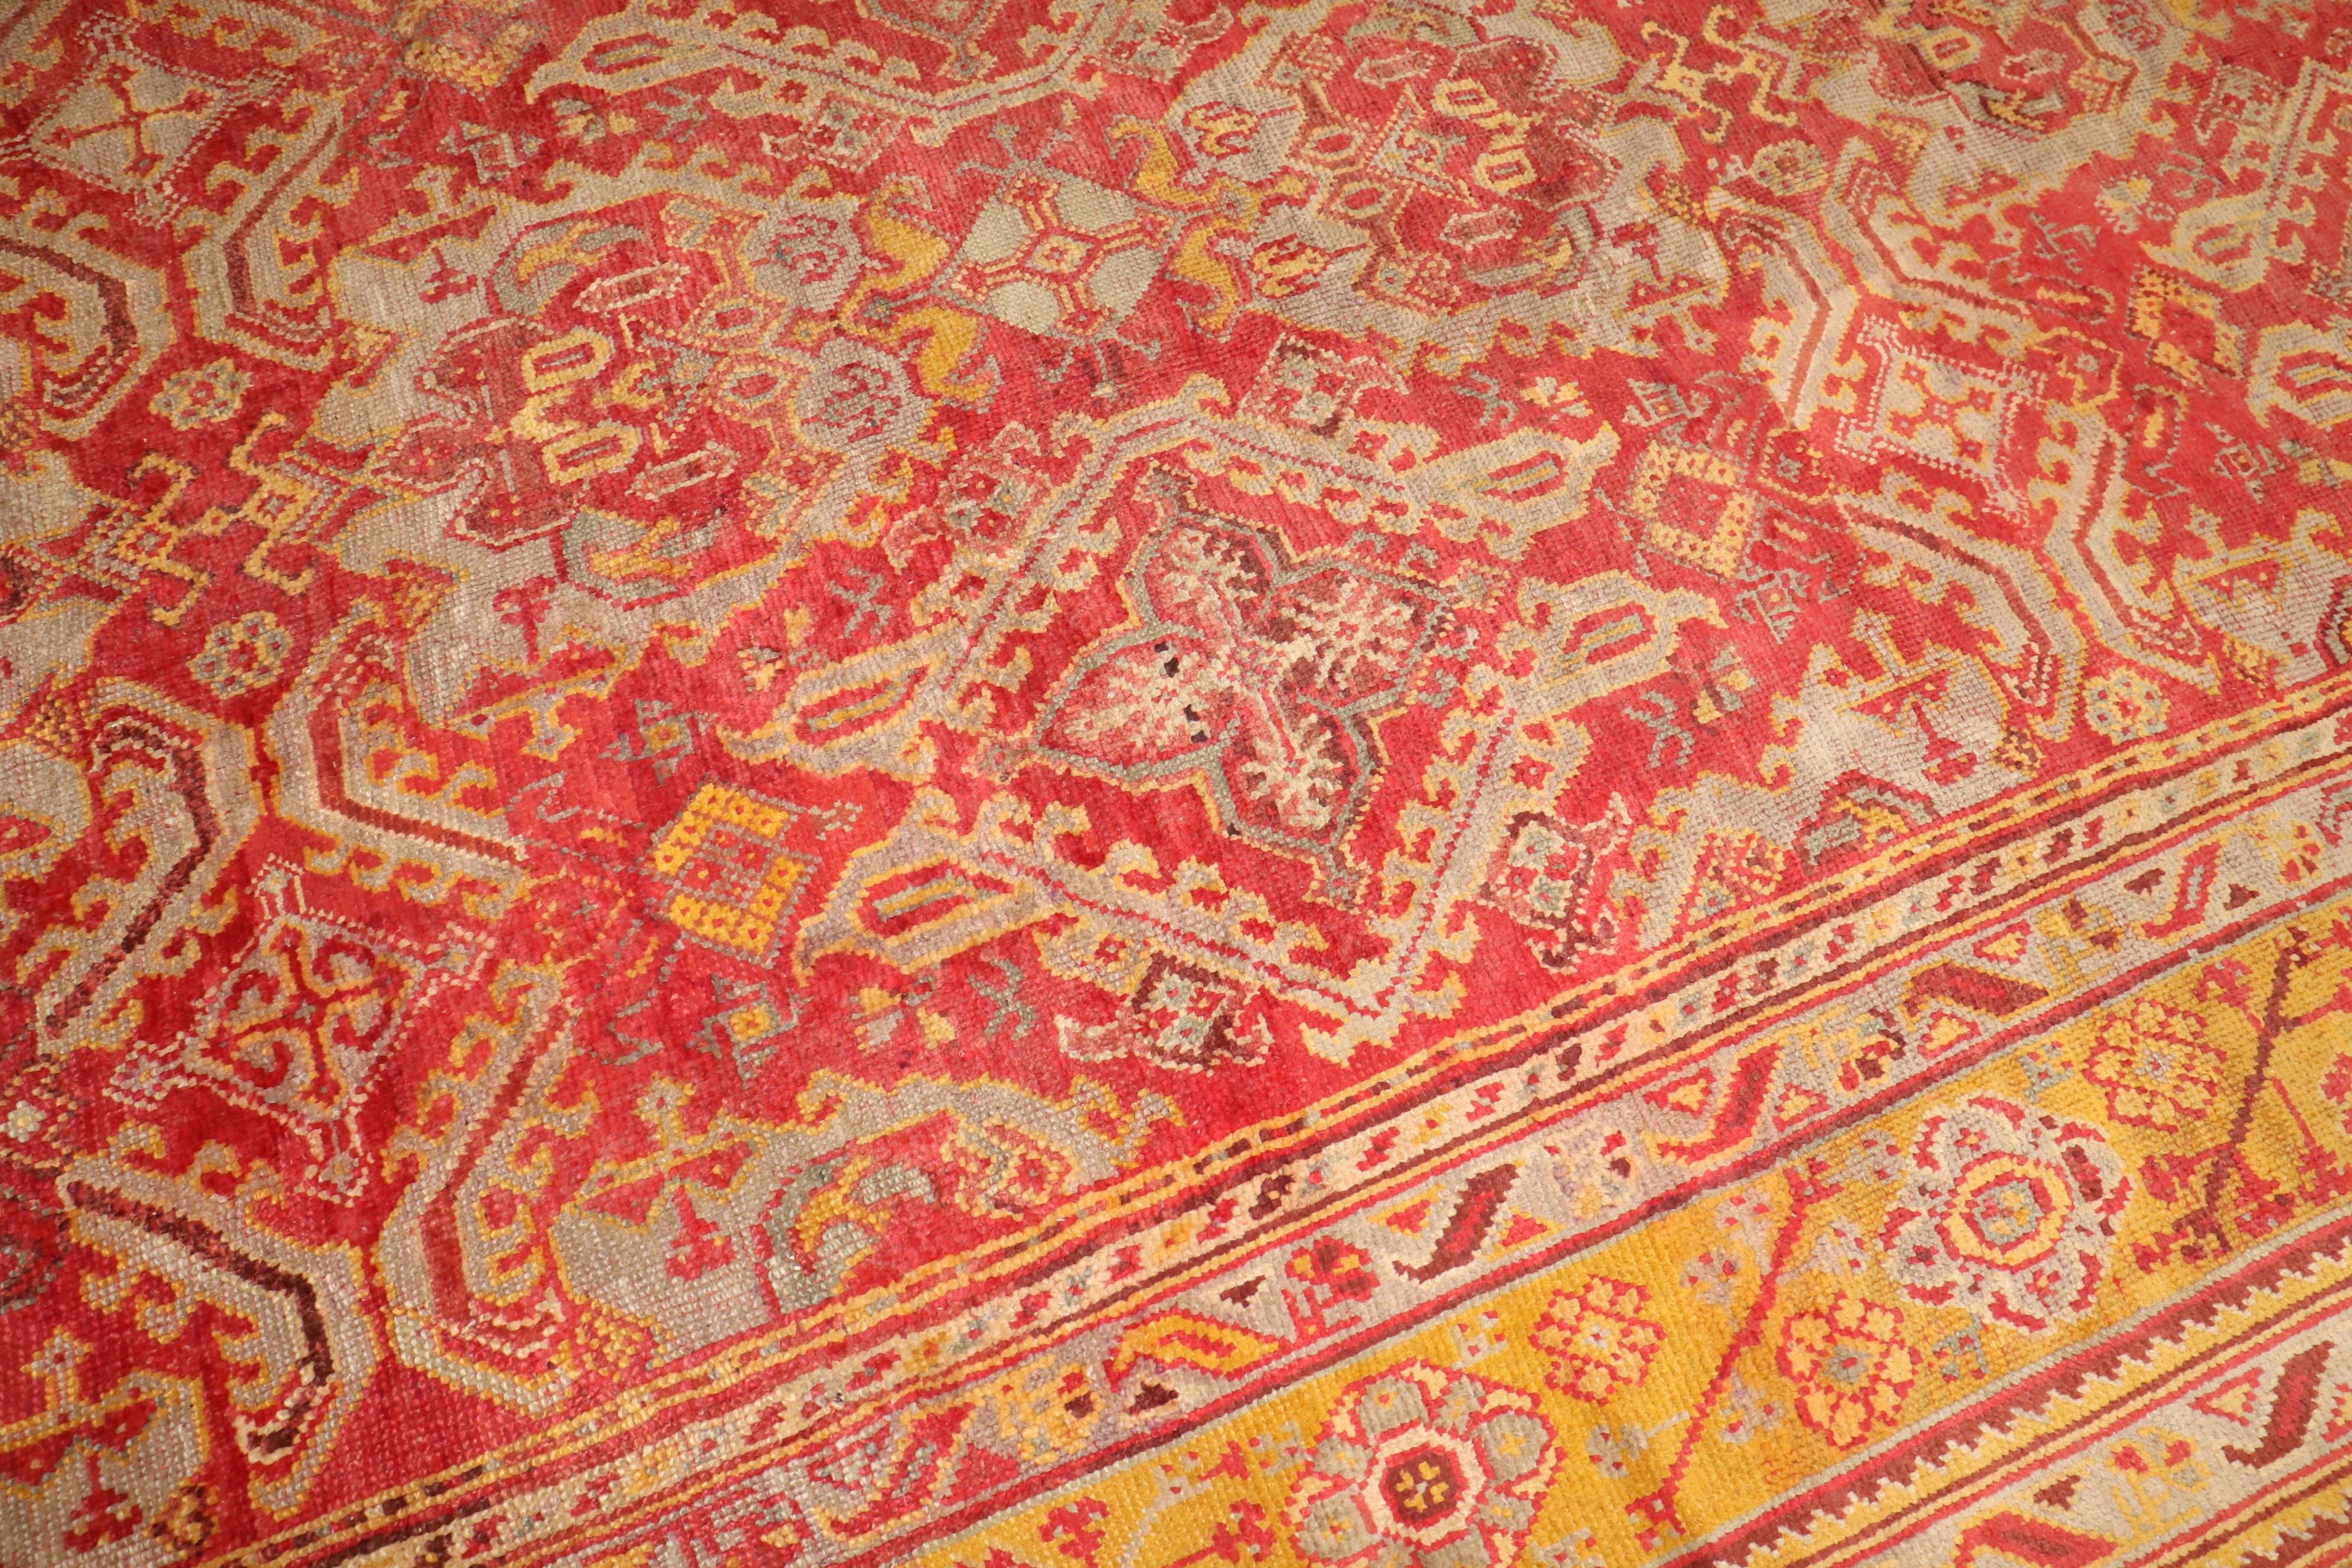 A colorful early 20th century antique Turkish Oushak rug. Predominantly Raspberry and mustard.

Measures: 12'2